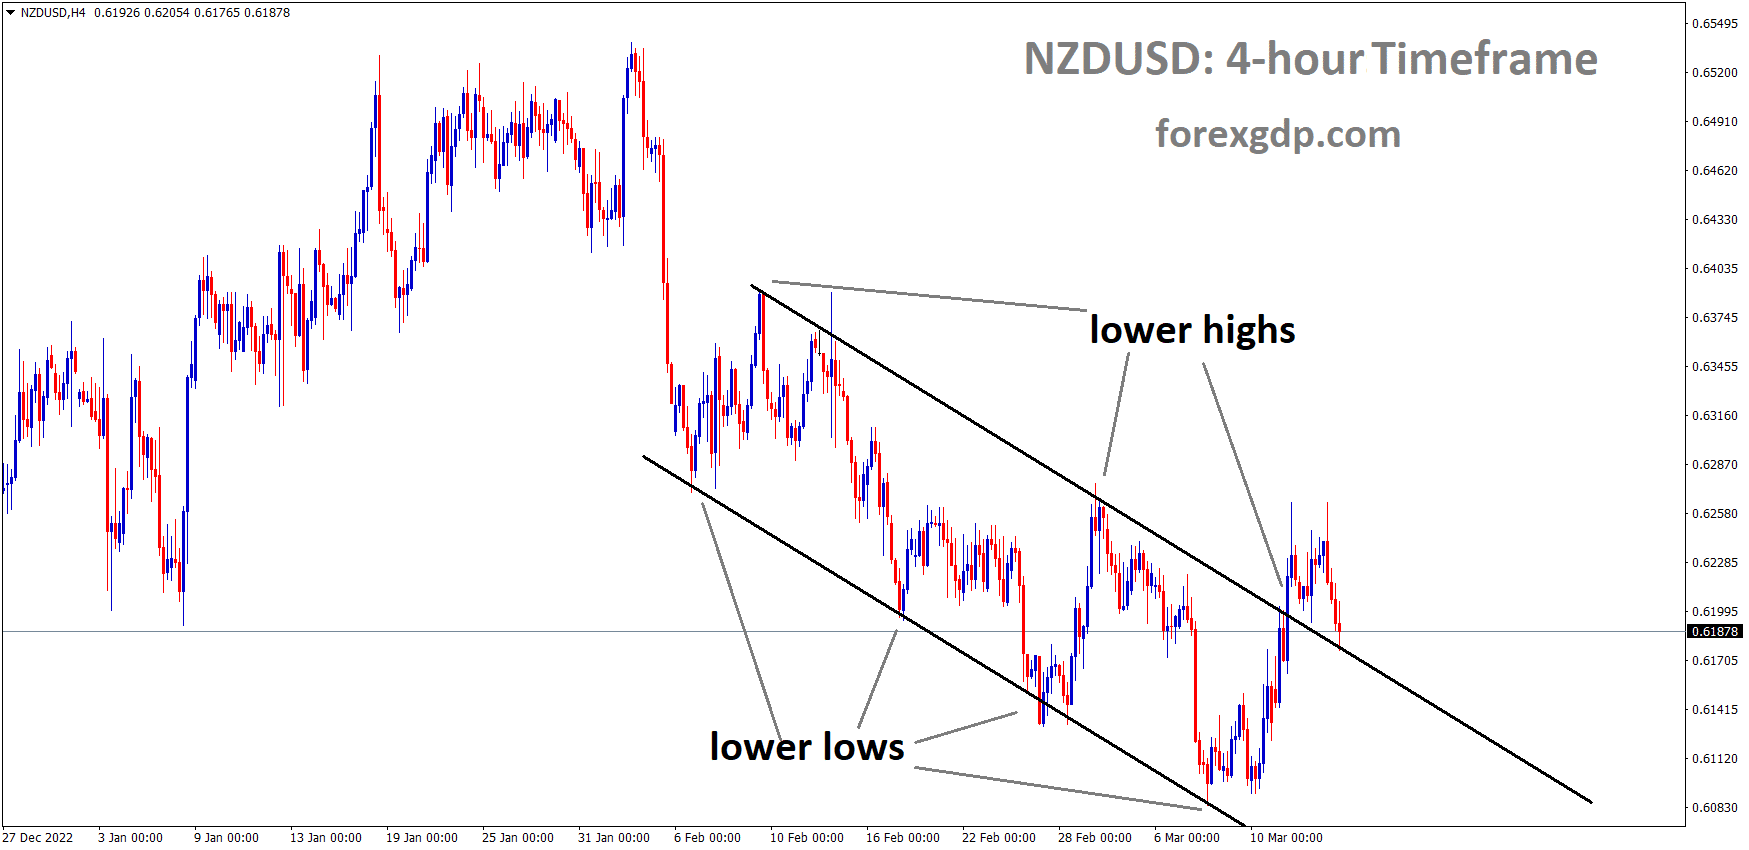 NZDUSD H4 TF analysis Market is moving in the Descending channel and the market has reached the lower high area of the channel